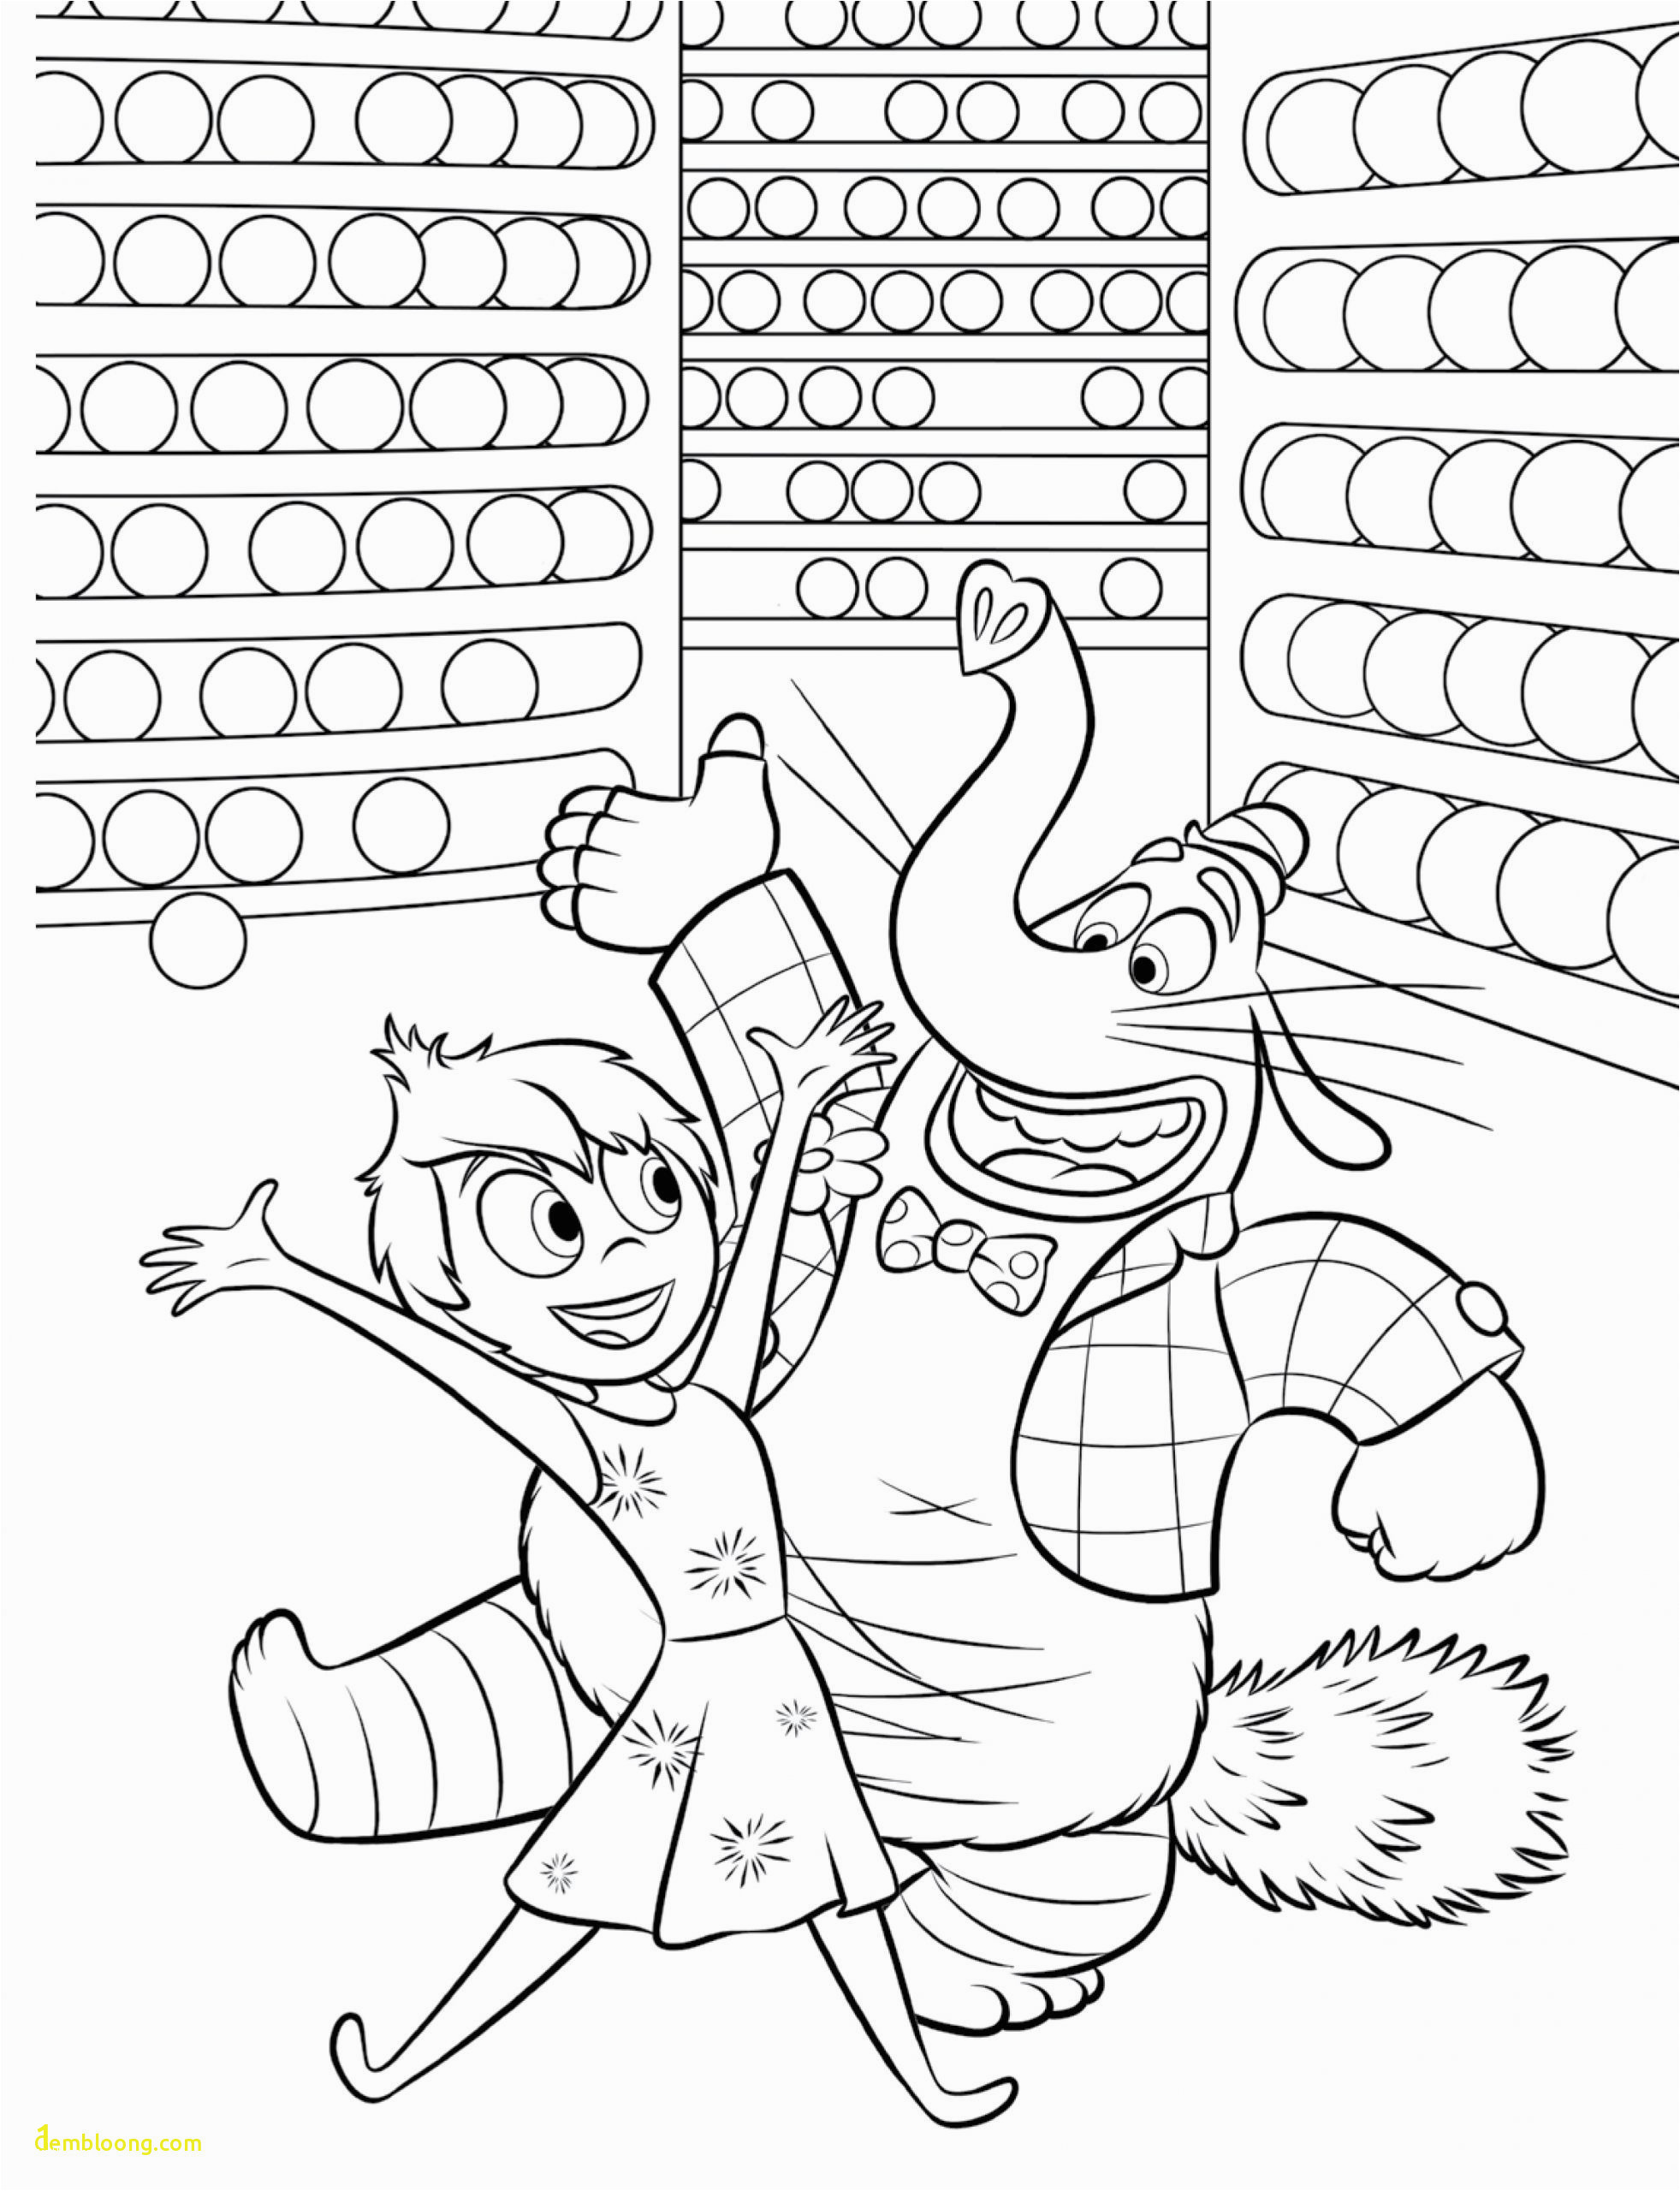 Coloring Pages for Inside Out Coloring Pages Printable Coloring Book for toddlers